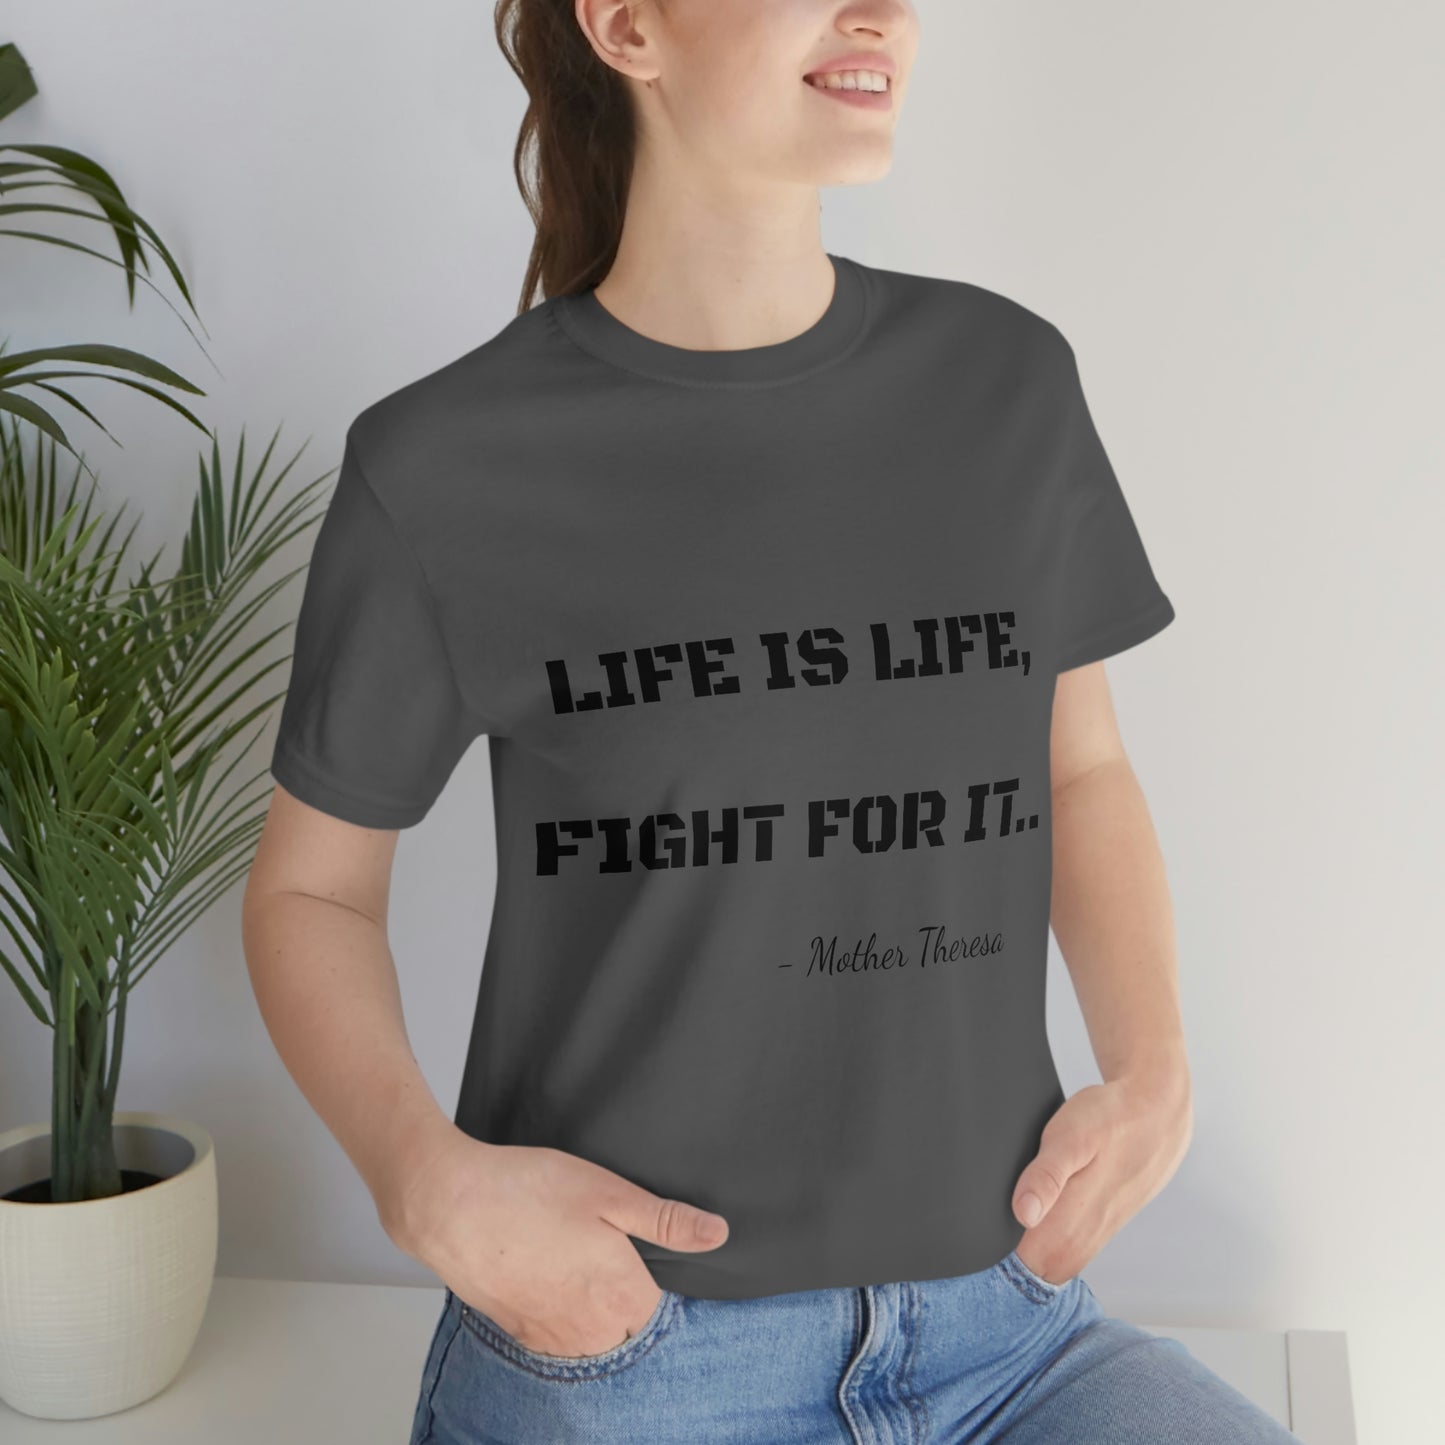 Life is Life, Fight For It